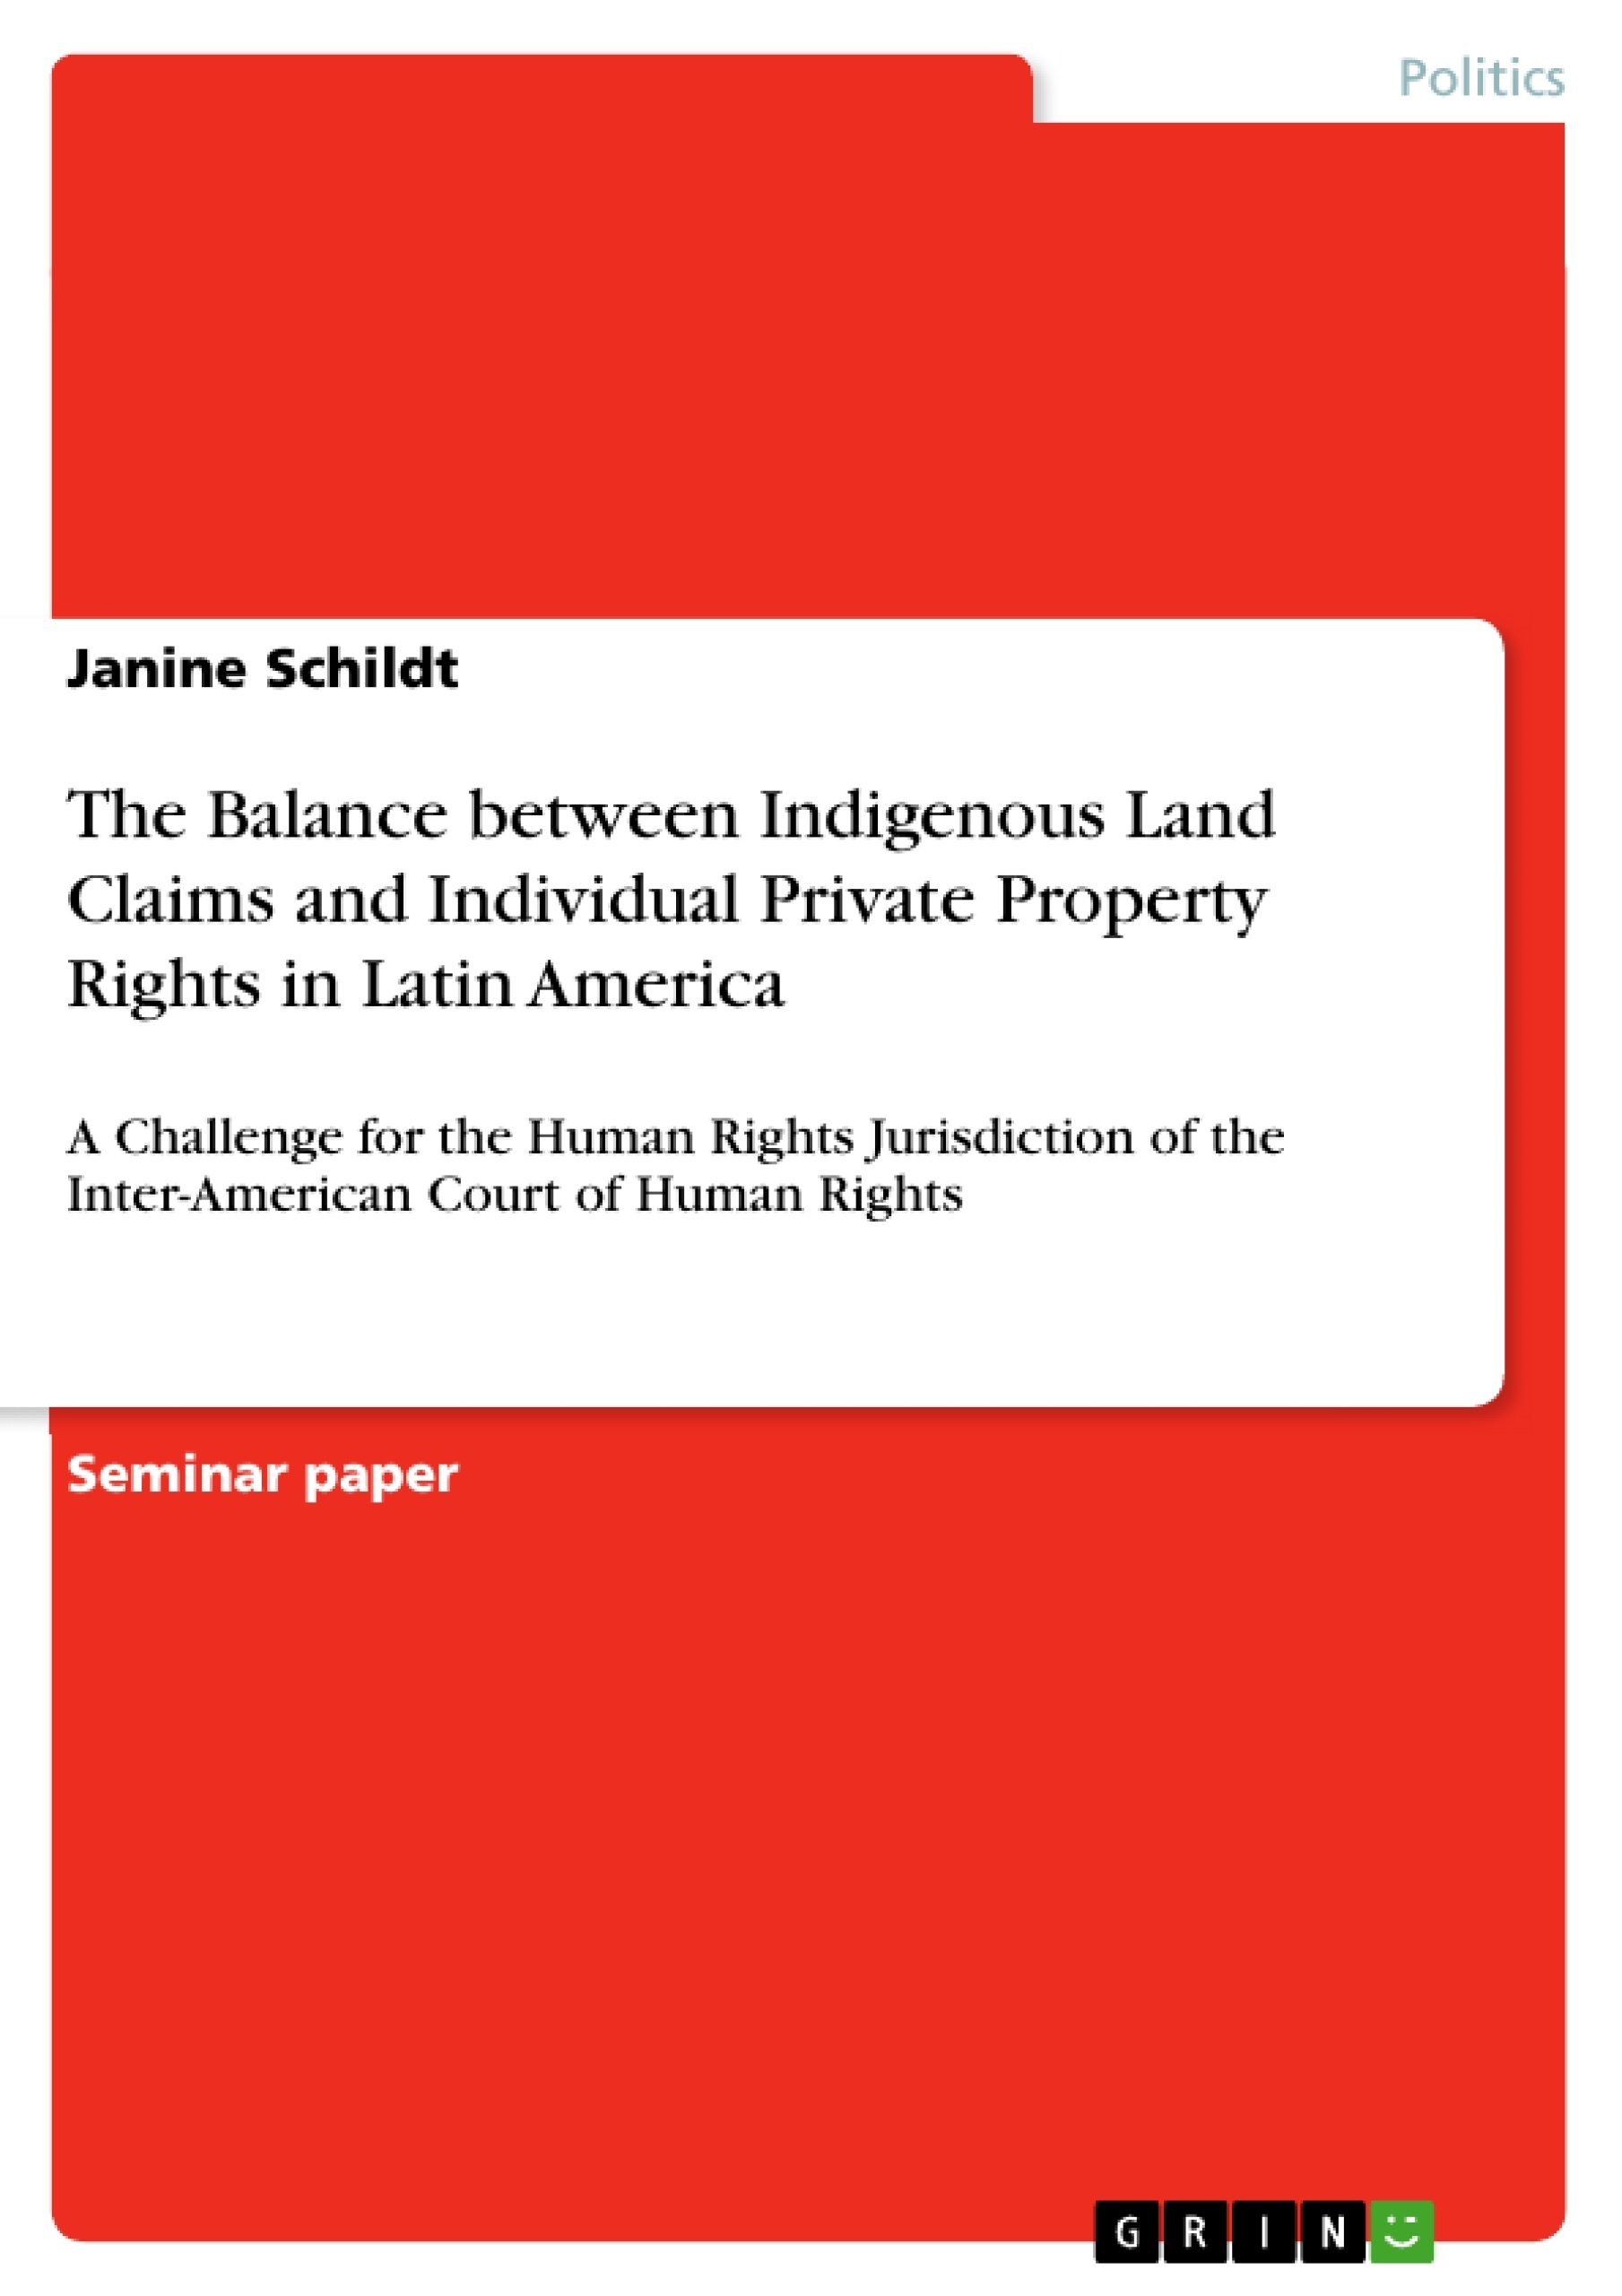 Titre: The Balance between Indigenous Land Claims and Individual Private Property Rights in Latin America 